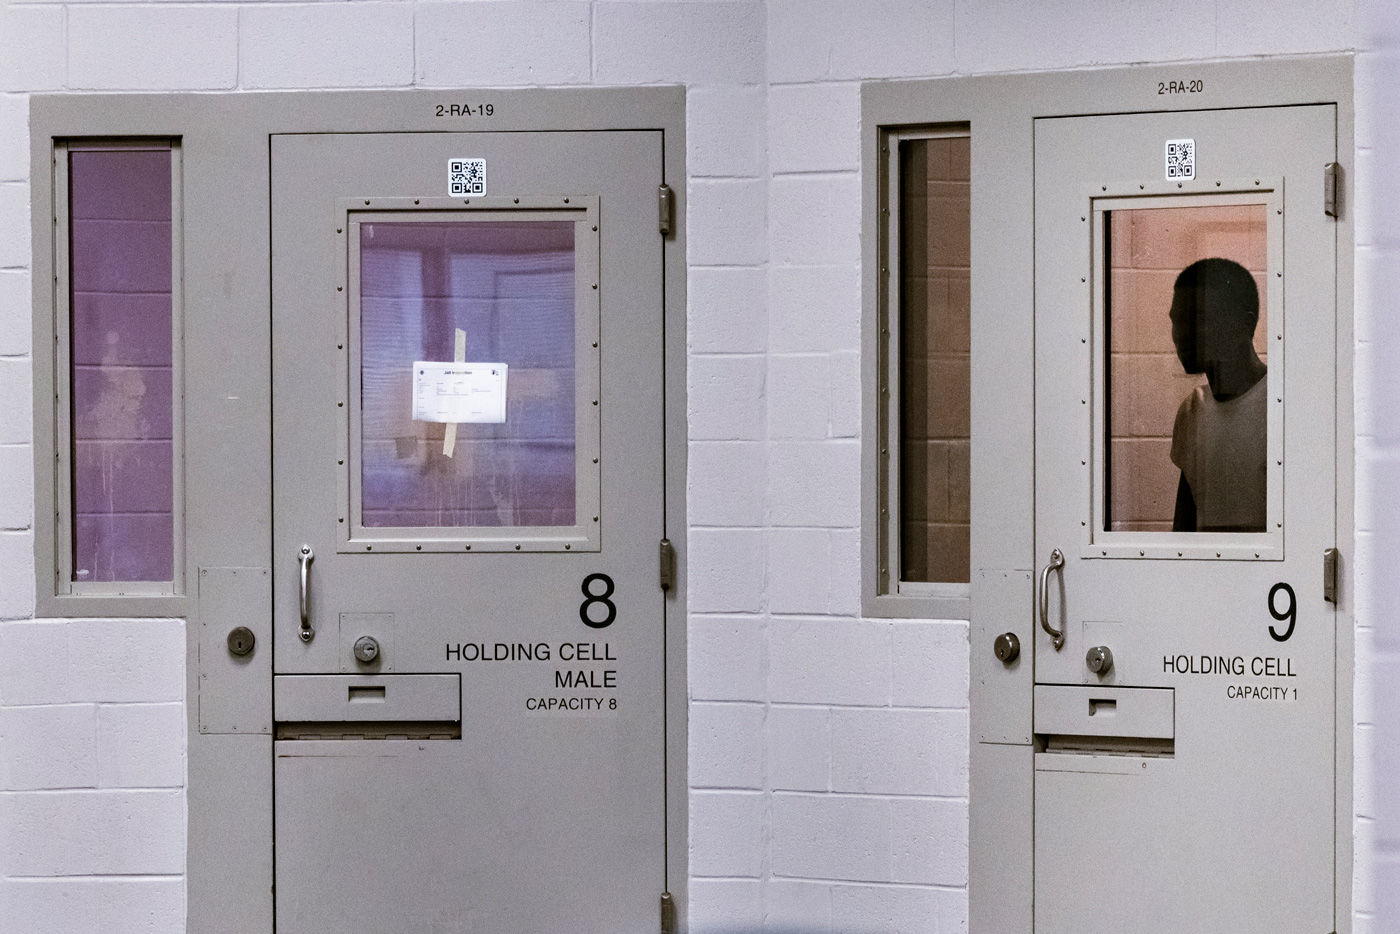 A person is detained inside a holding cell in the Harris County Joint Processing Center.